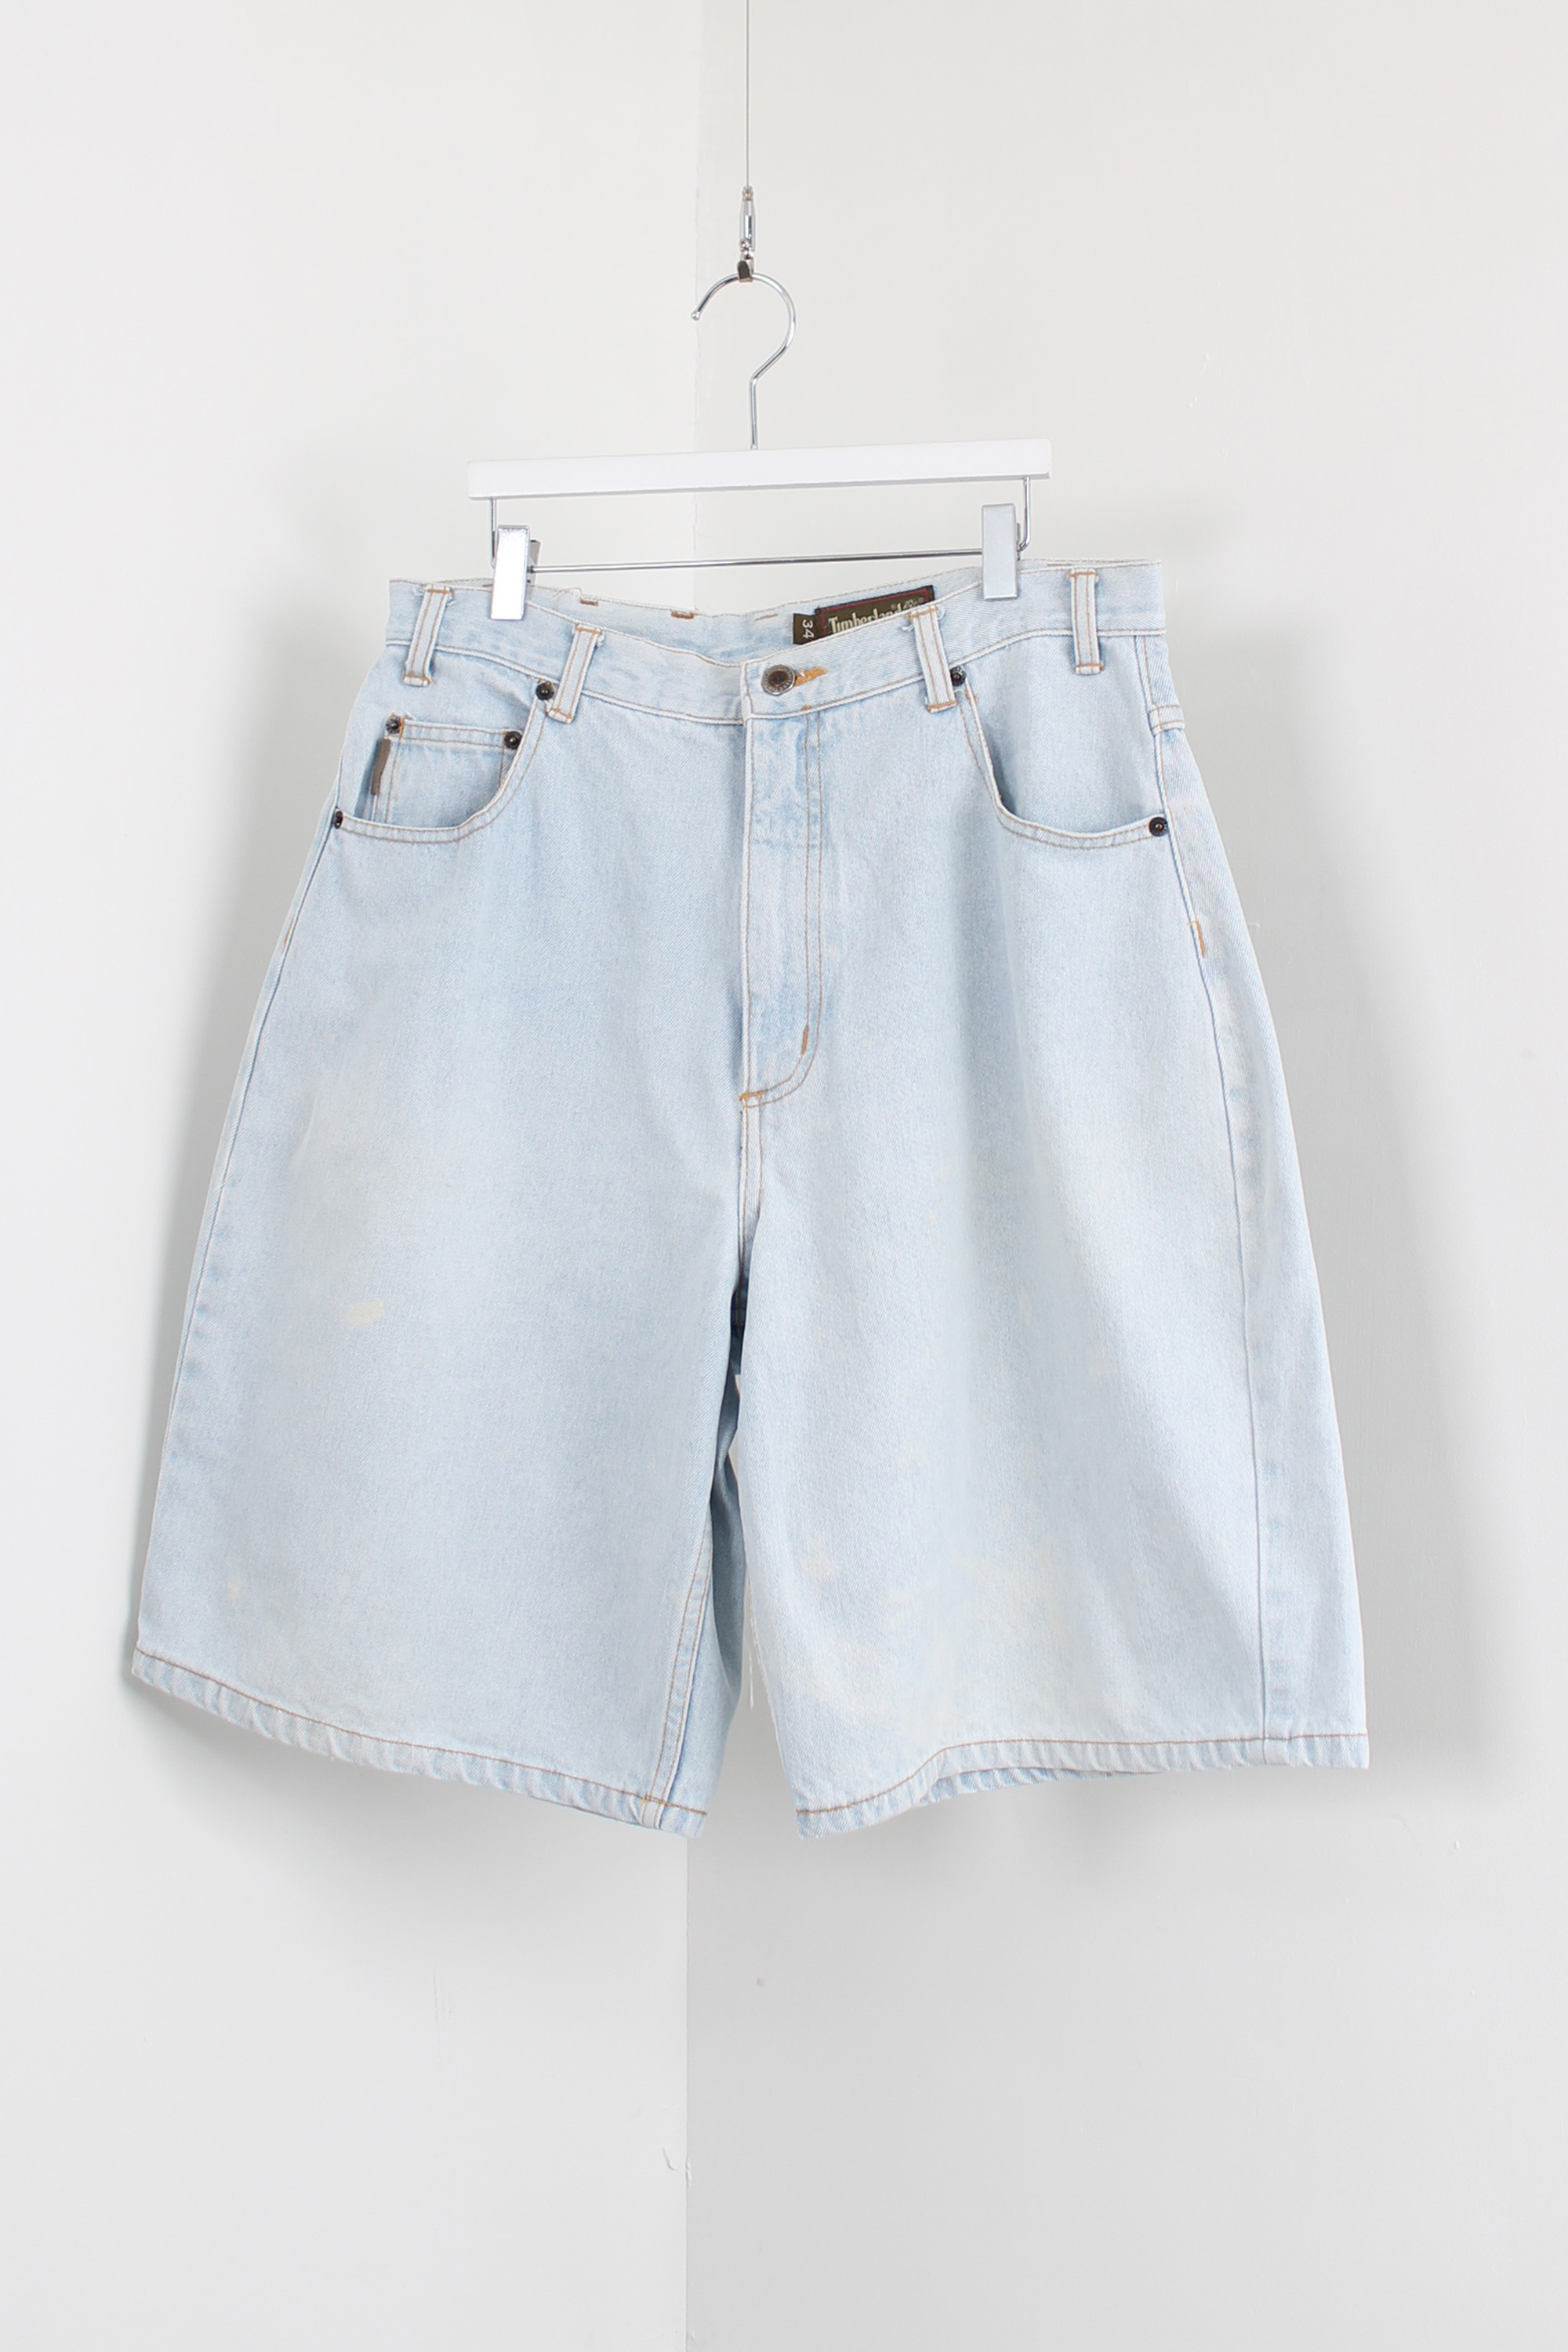 TIMBERLAND shorts(made in U.S.A)